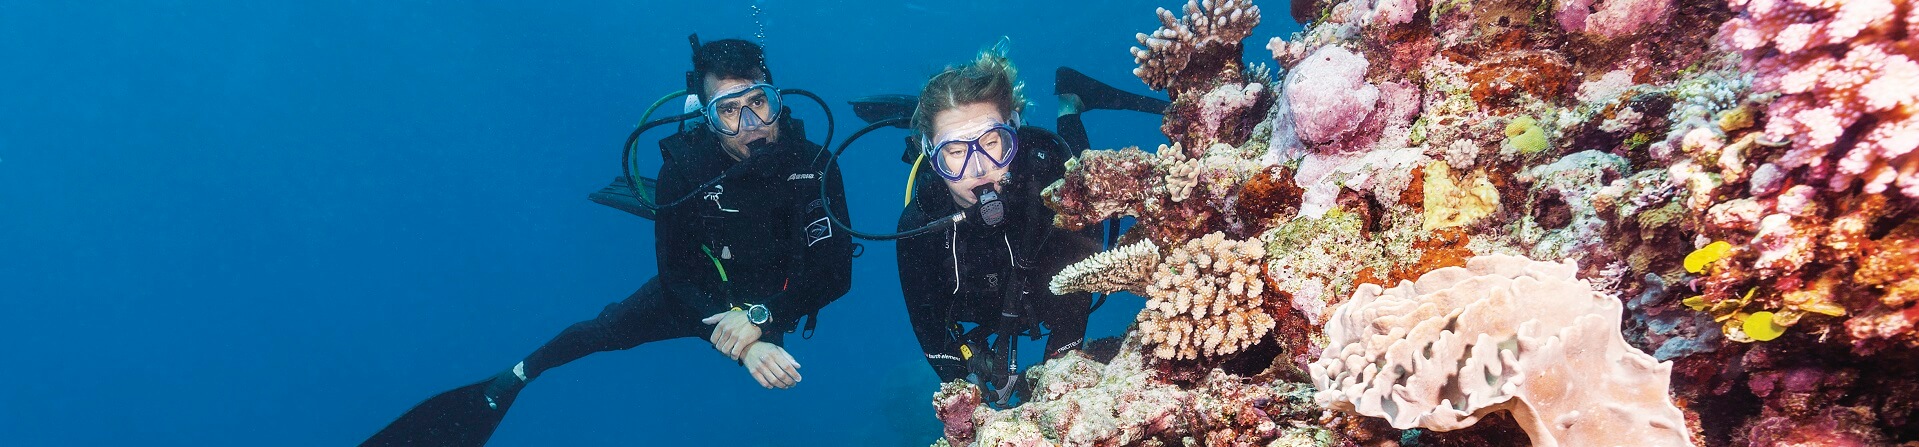 What are the rules of scuba diving?